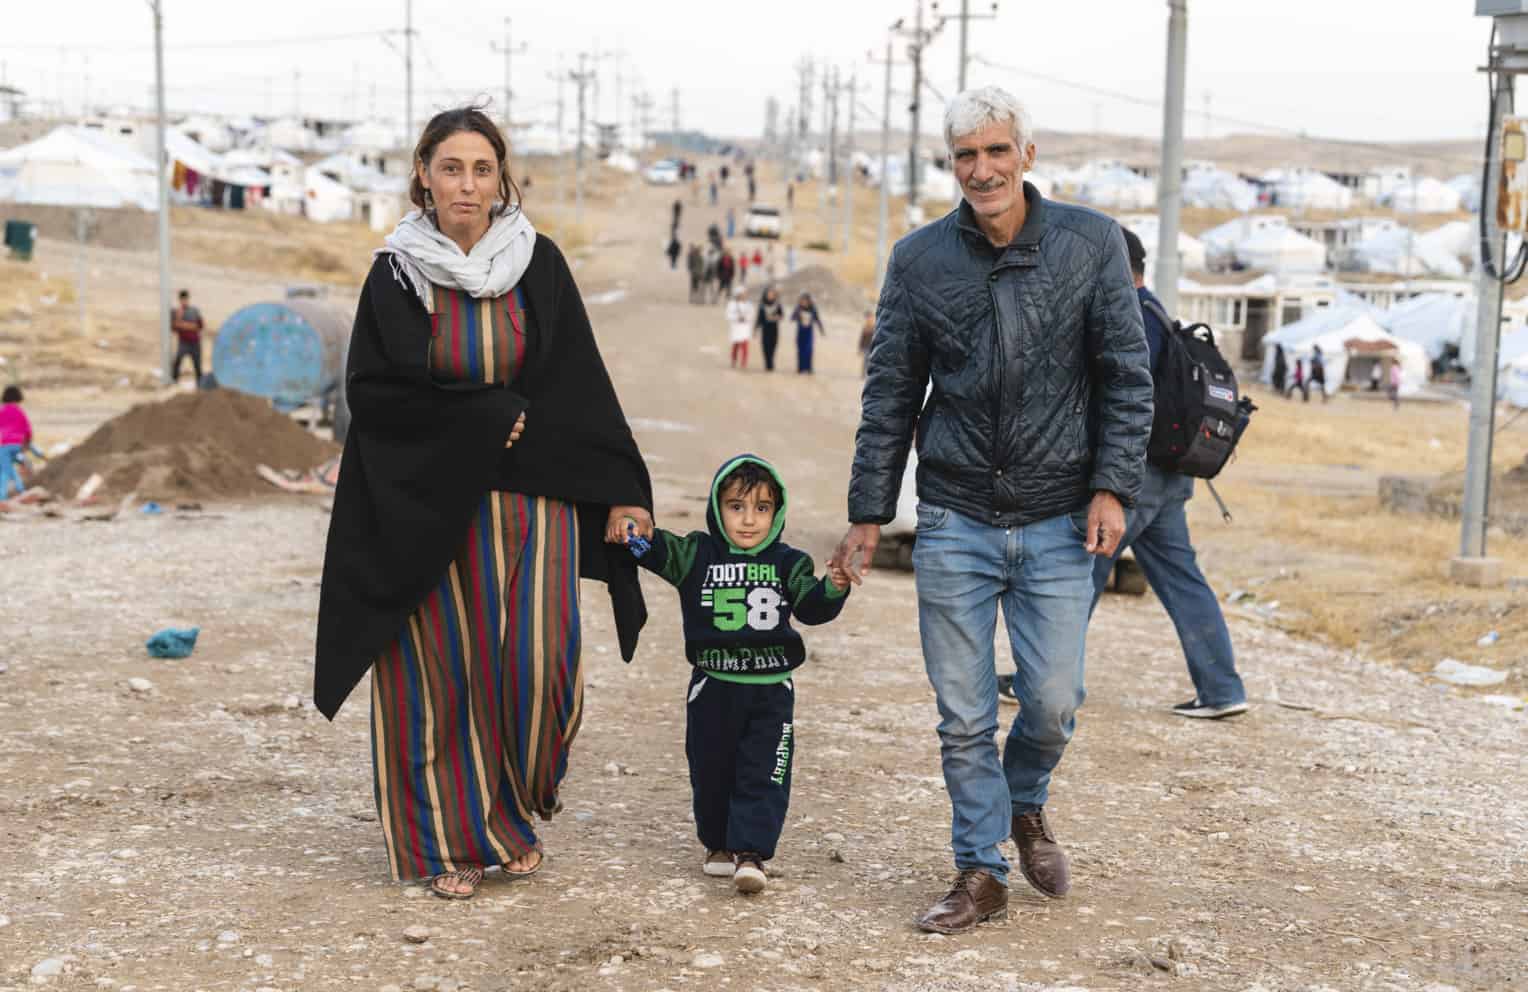 Mirko and his wife and young son walk down the road in Bardarash camp.